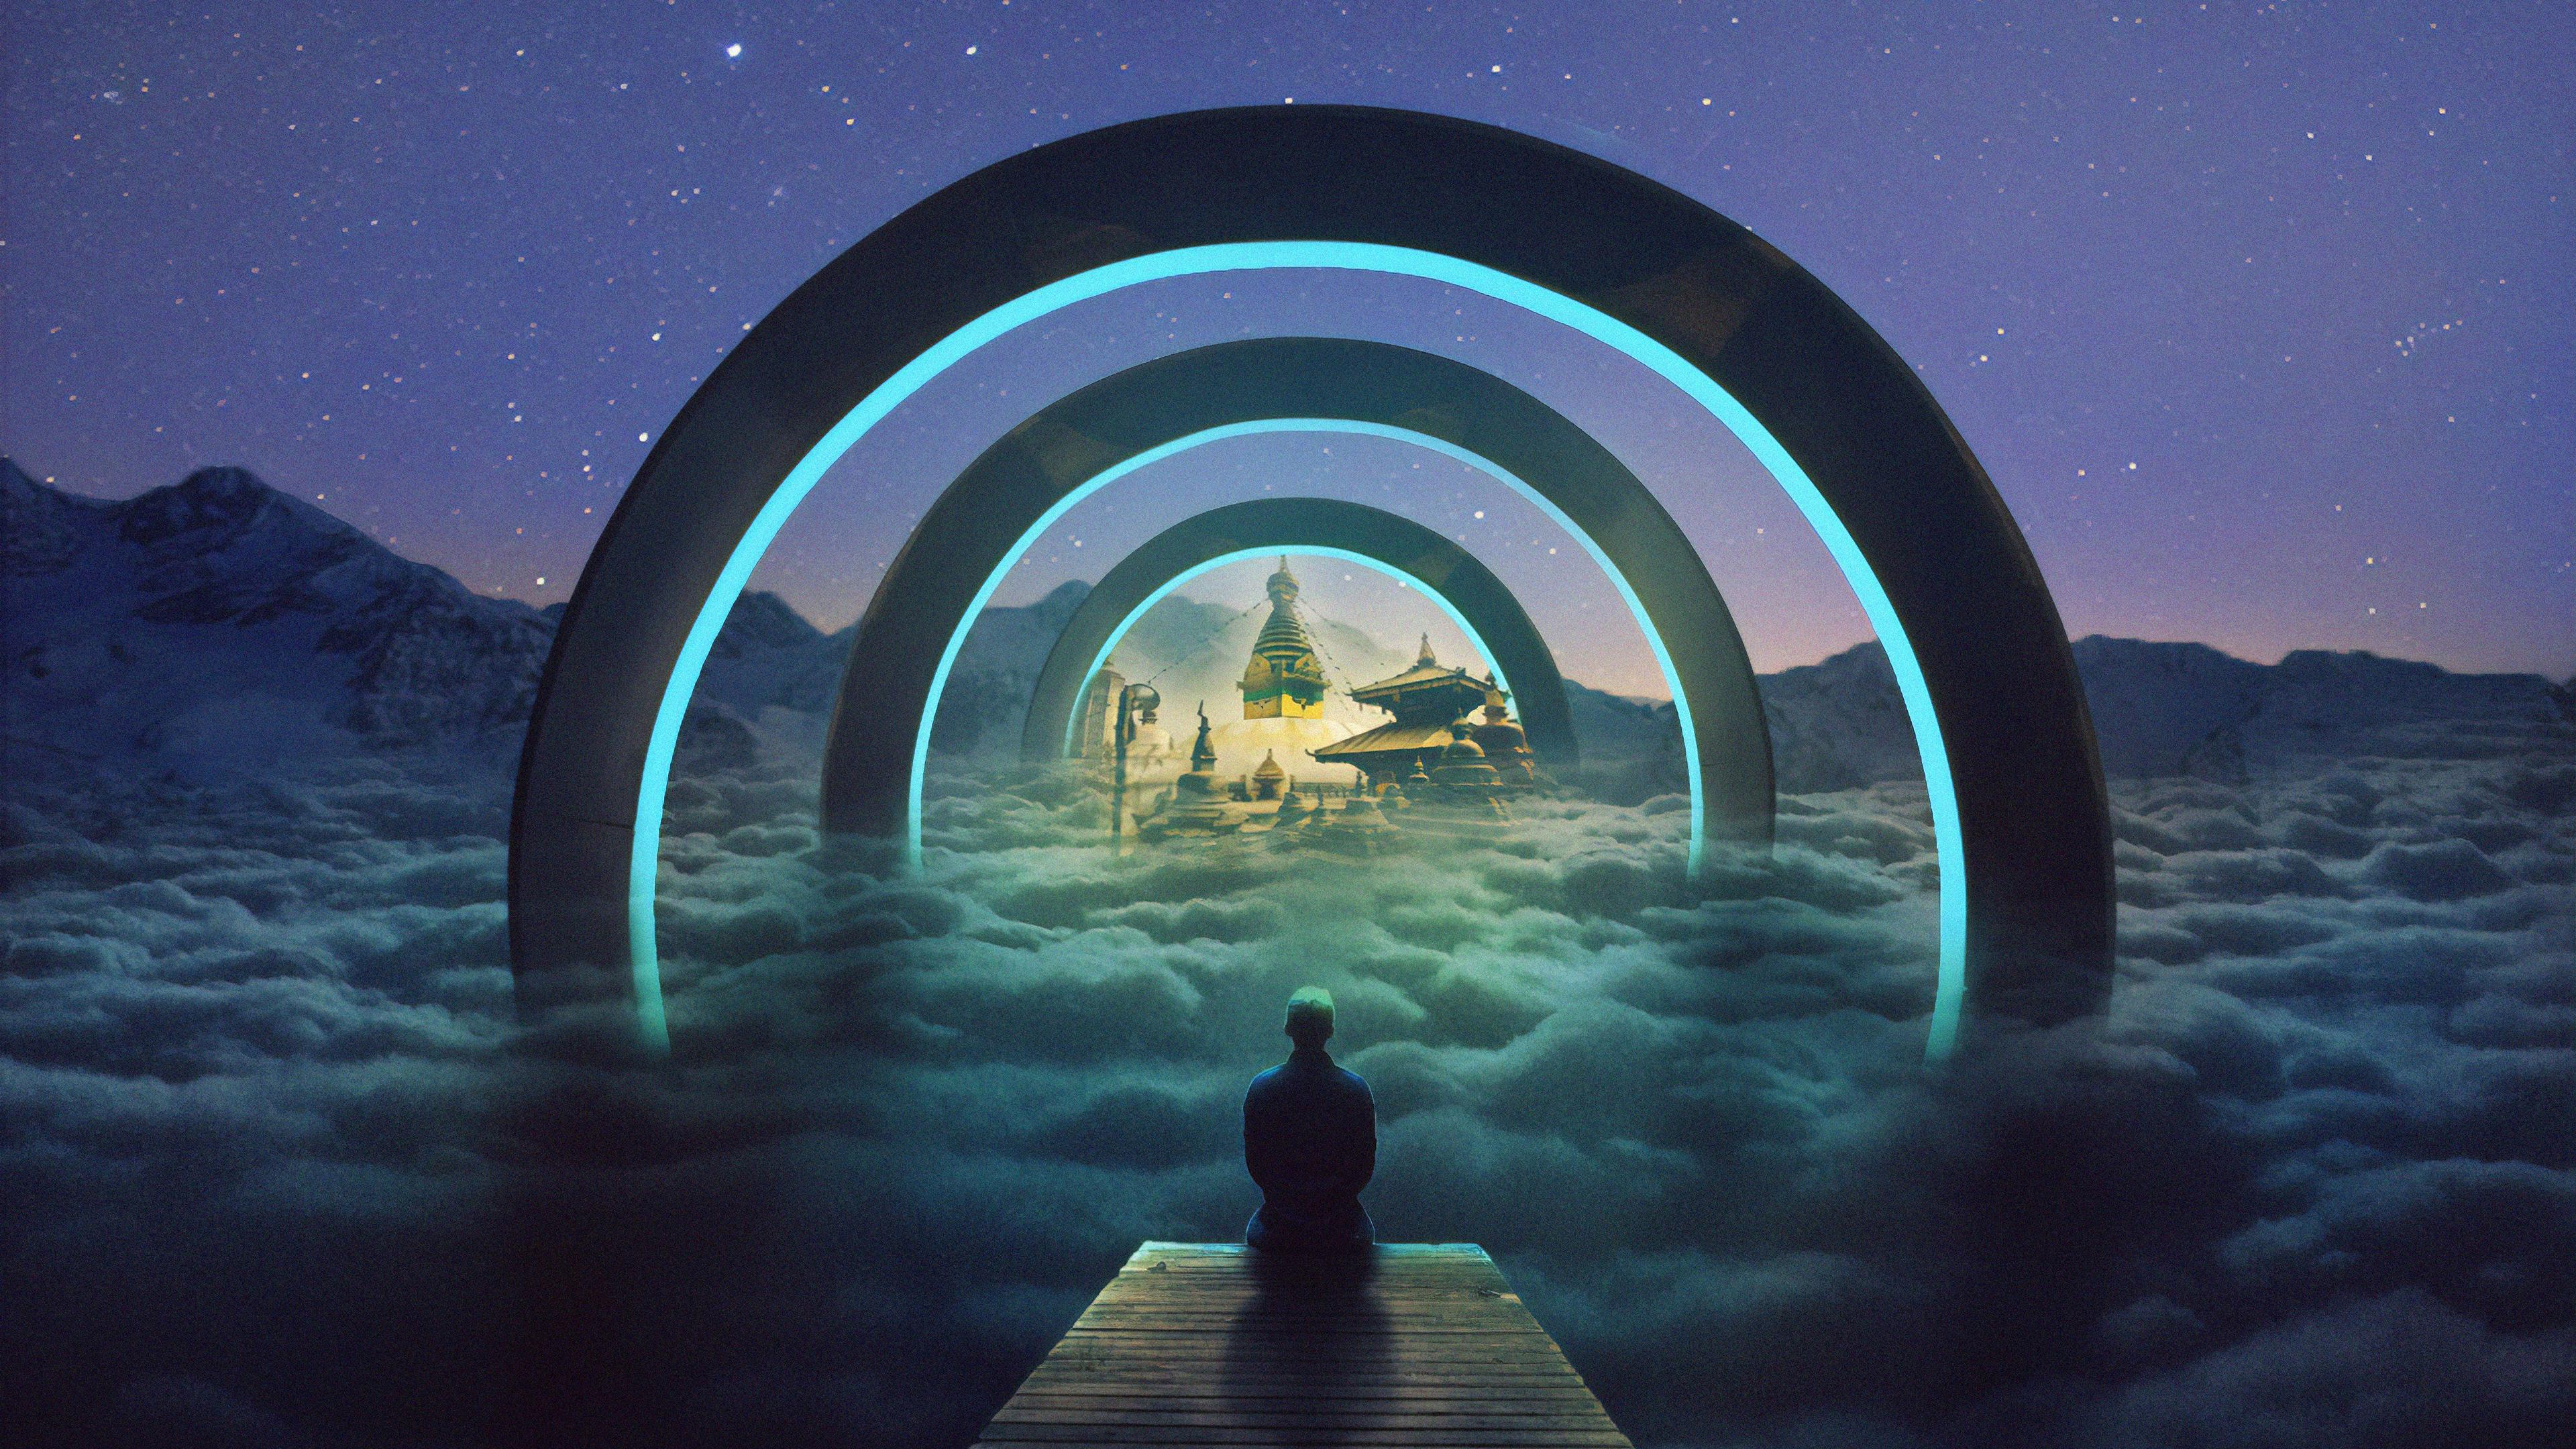 Surreal Wallpapers Top Free Surreal Backgrounds Wallp - vrogue.co